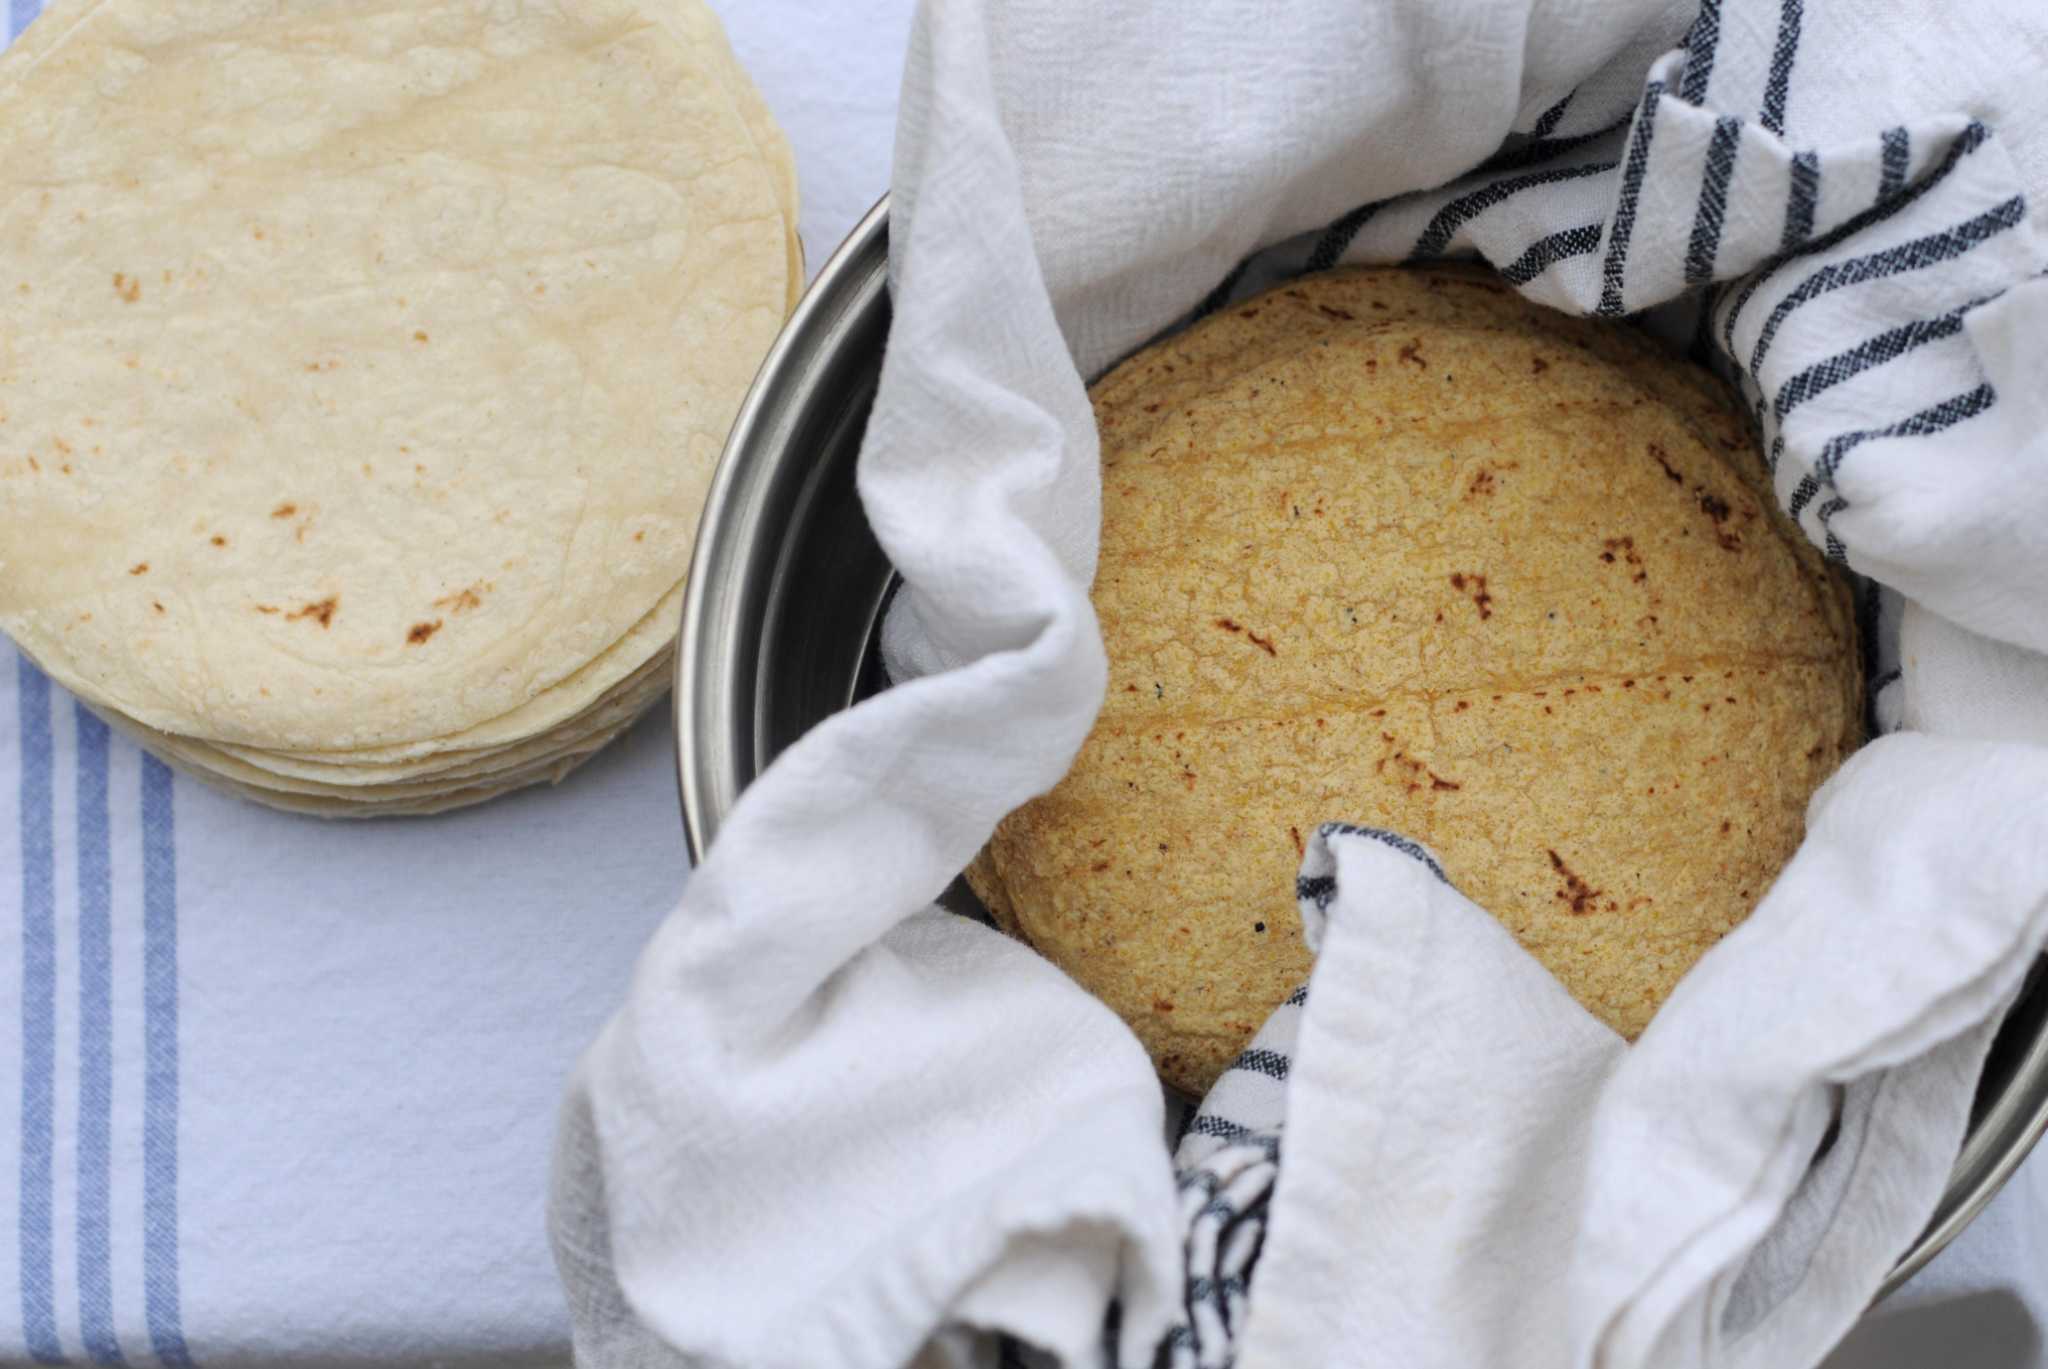 How To Store Tortillas In The Fridge